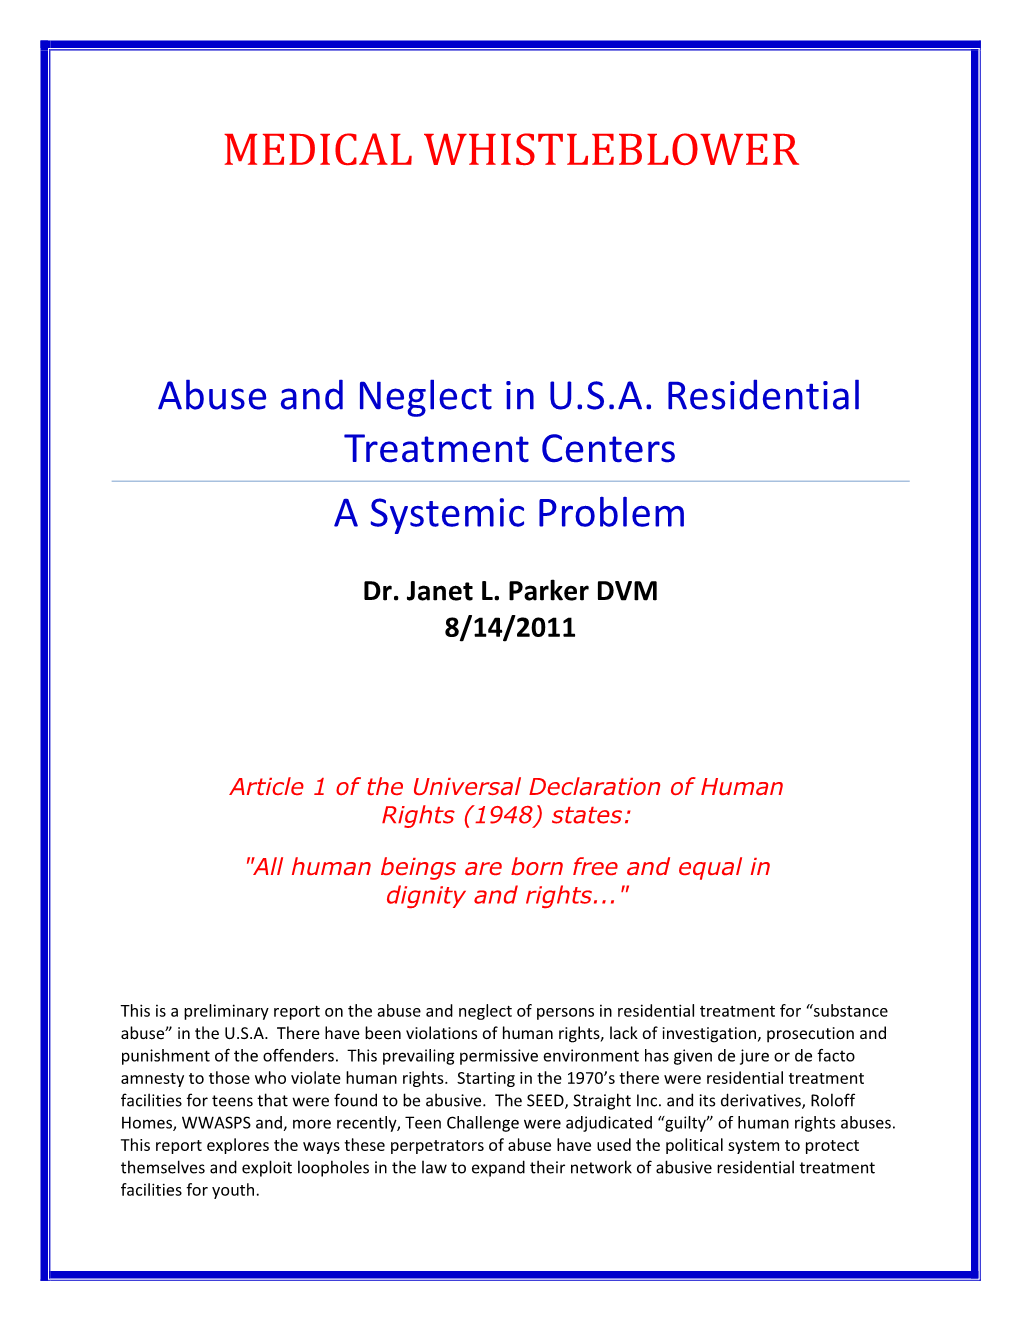 Abuse and Neglect in U.S.A. Residential Treatment Centers a Systemic Problem